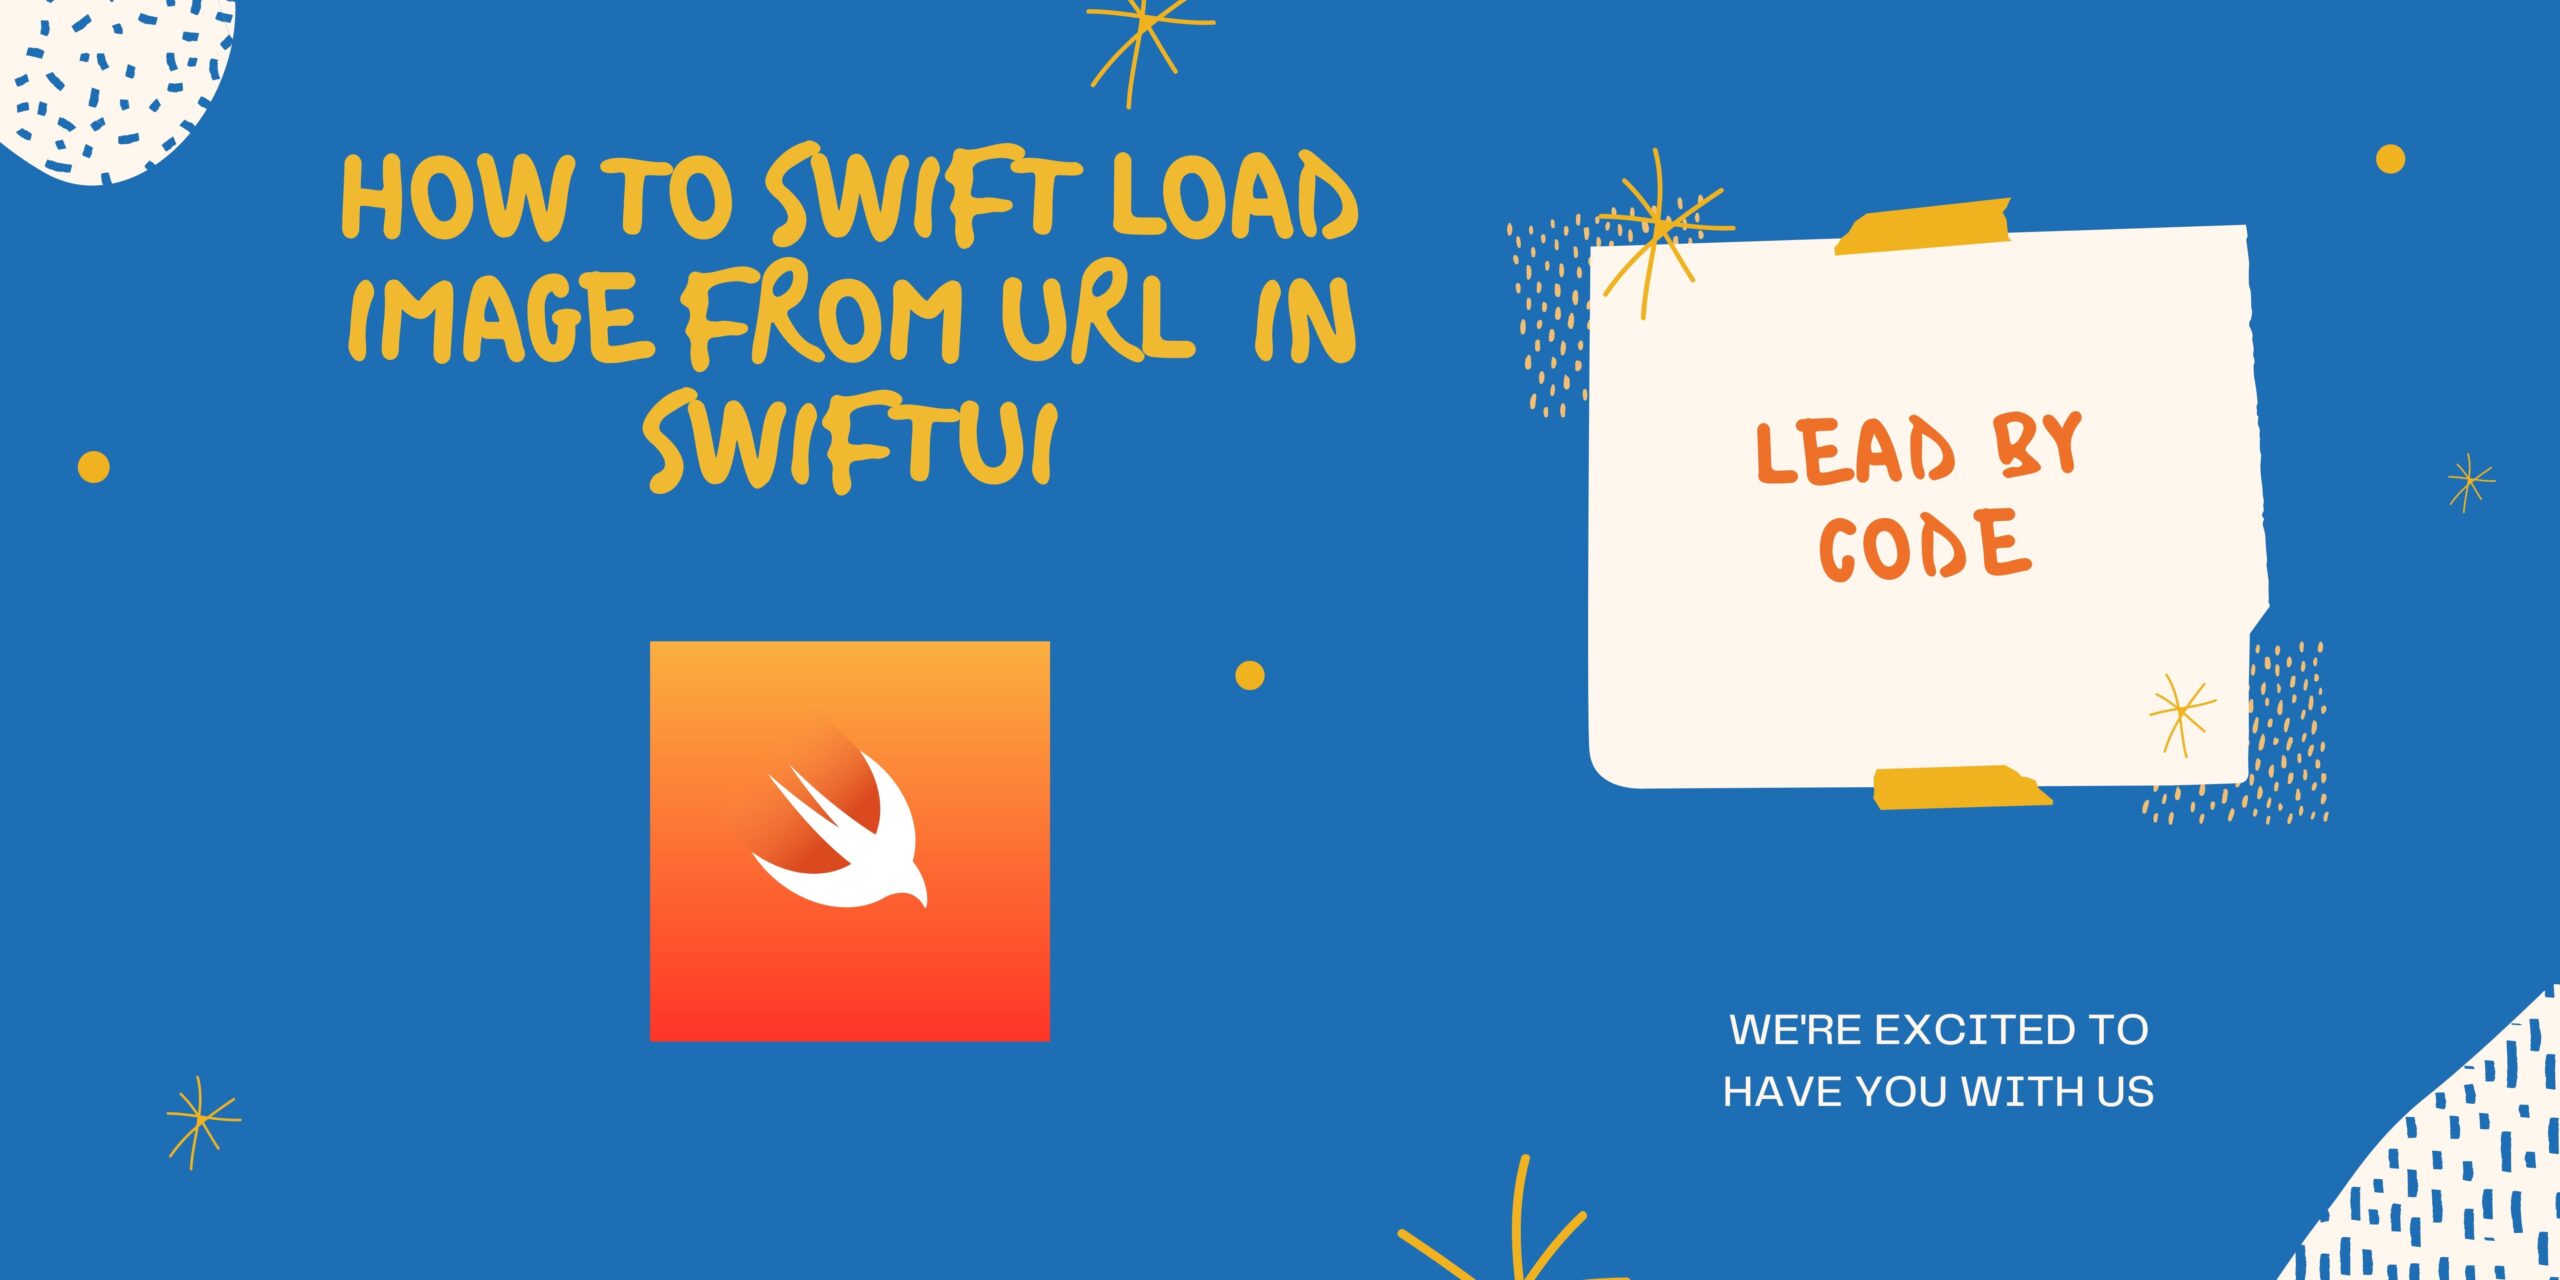 How to swift load image from url  in SwiftUI